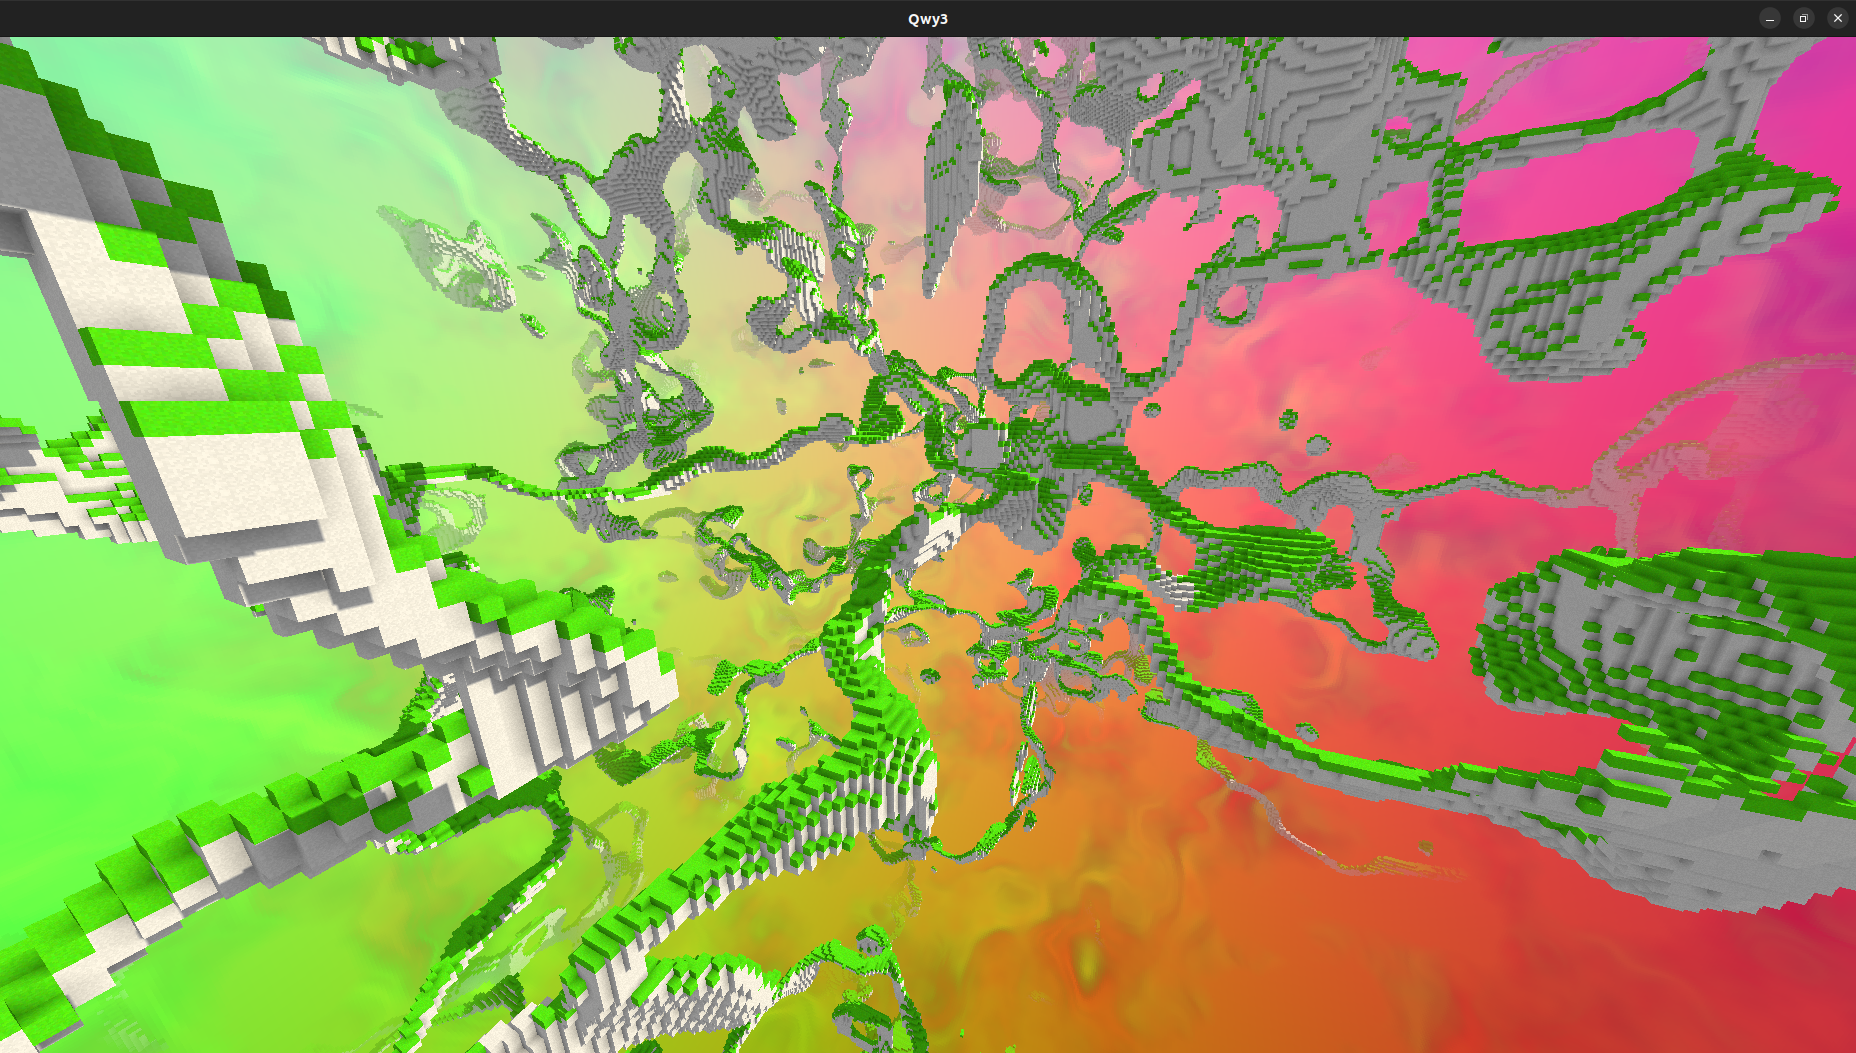 Image of some terrain generation based on noise in an interesting way (I hope!).